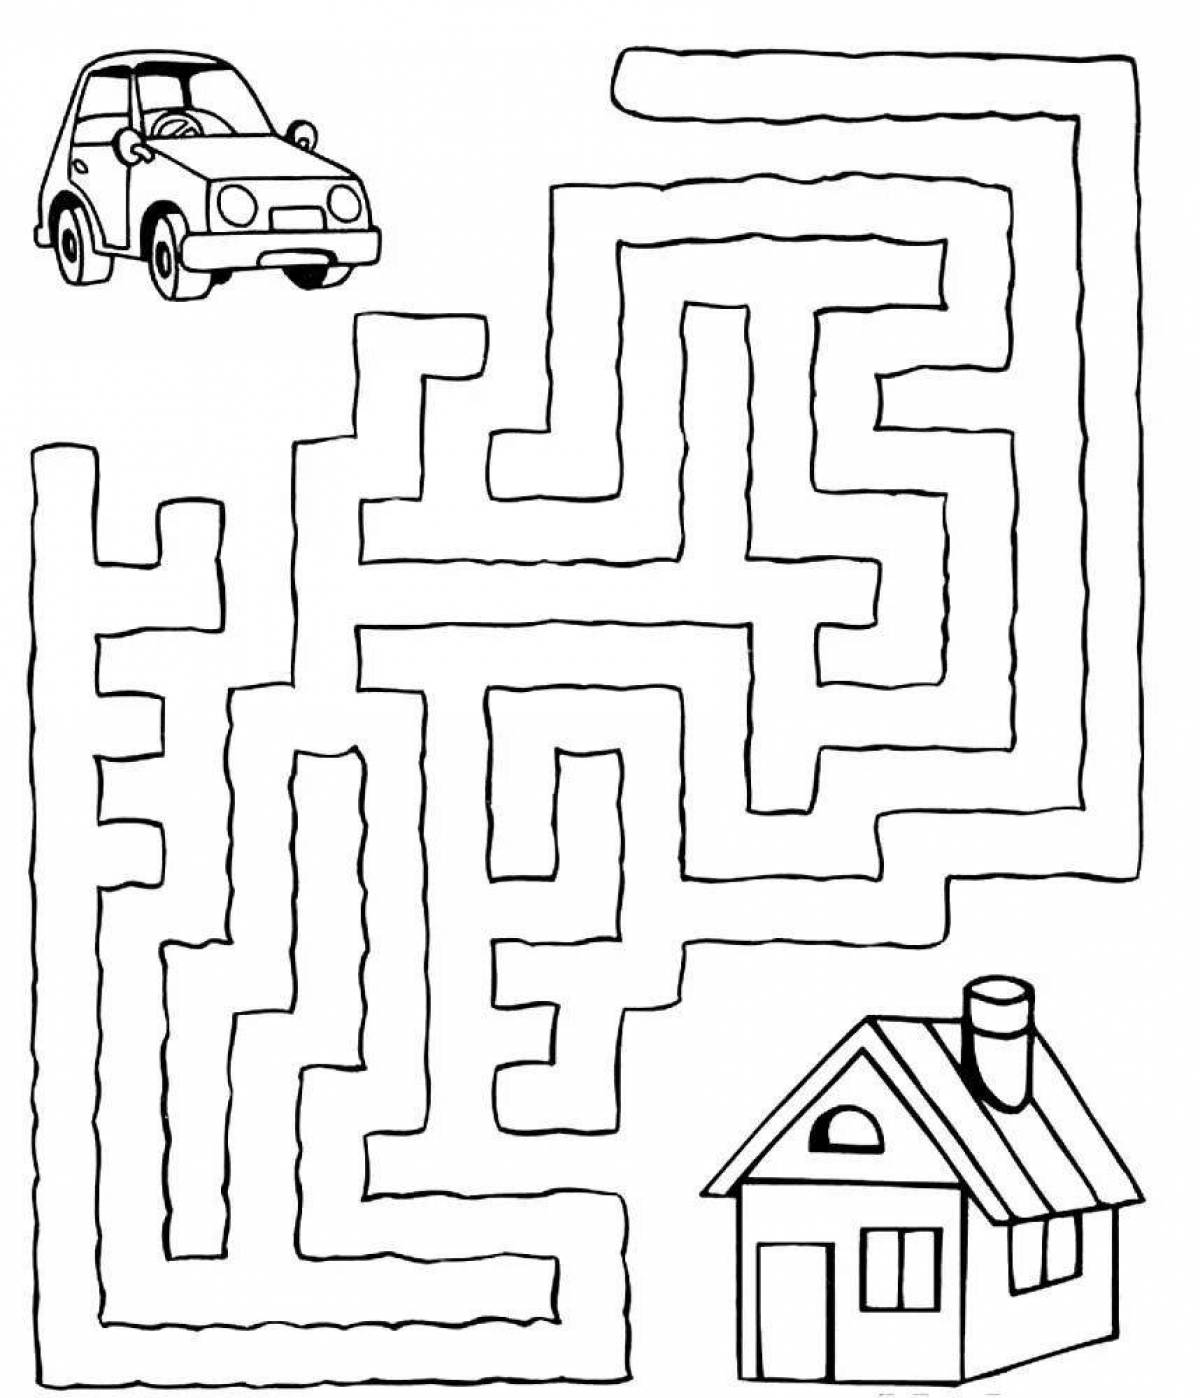 Innovative maze coloring book for 4 year olds